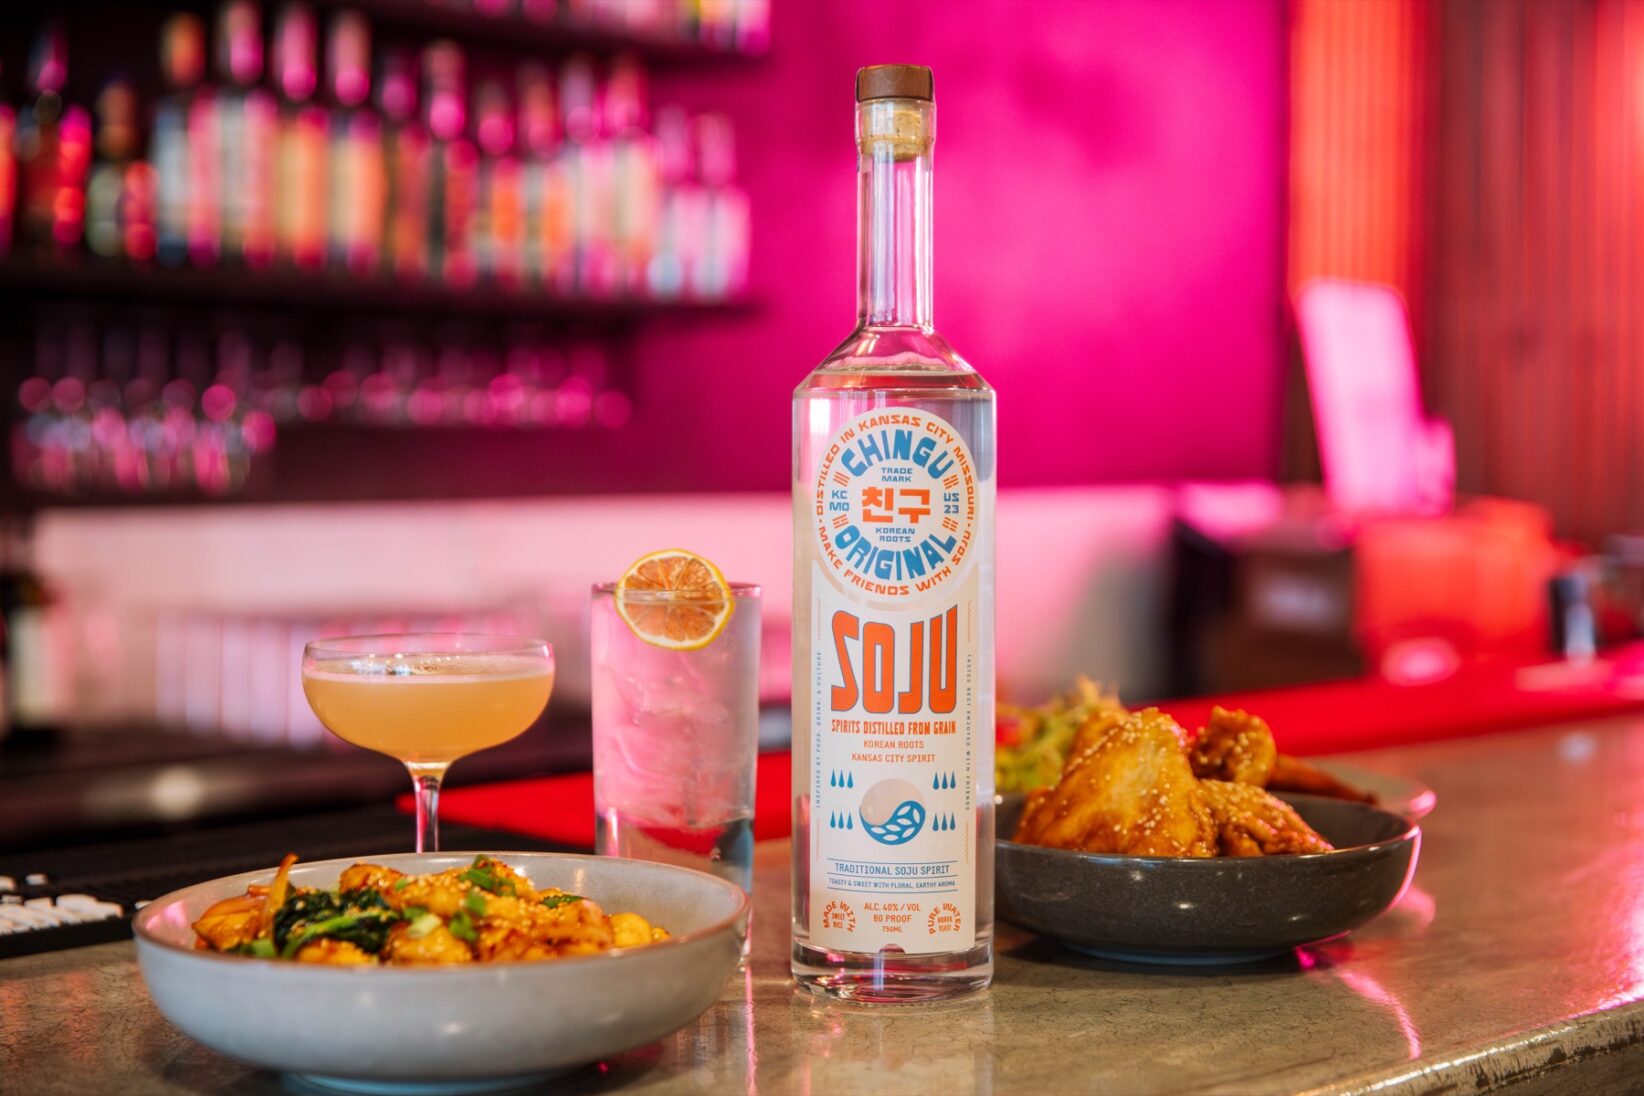 Chingu founders, Mean Mule partner for KC’s first soju — a Korean nod to vodka, distilled with culture